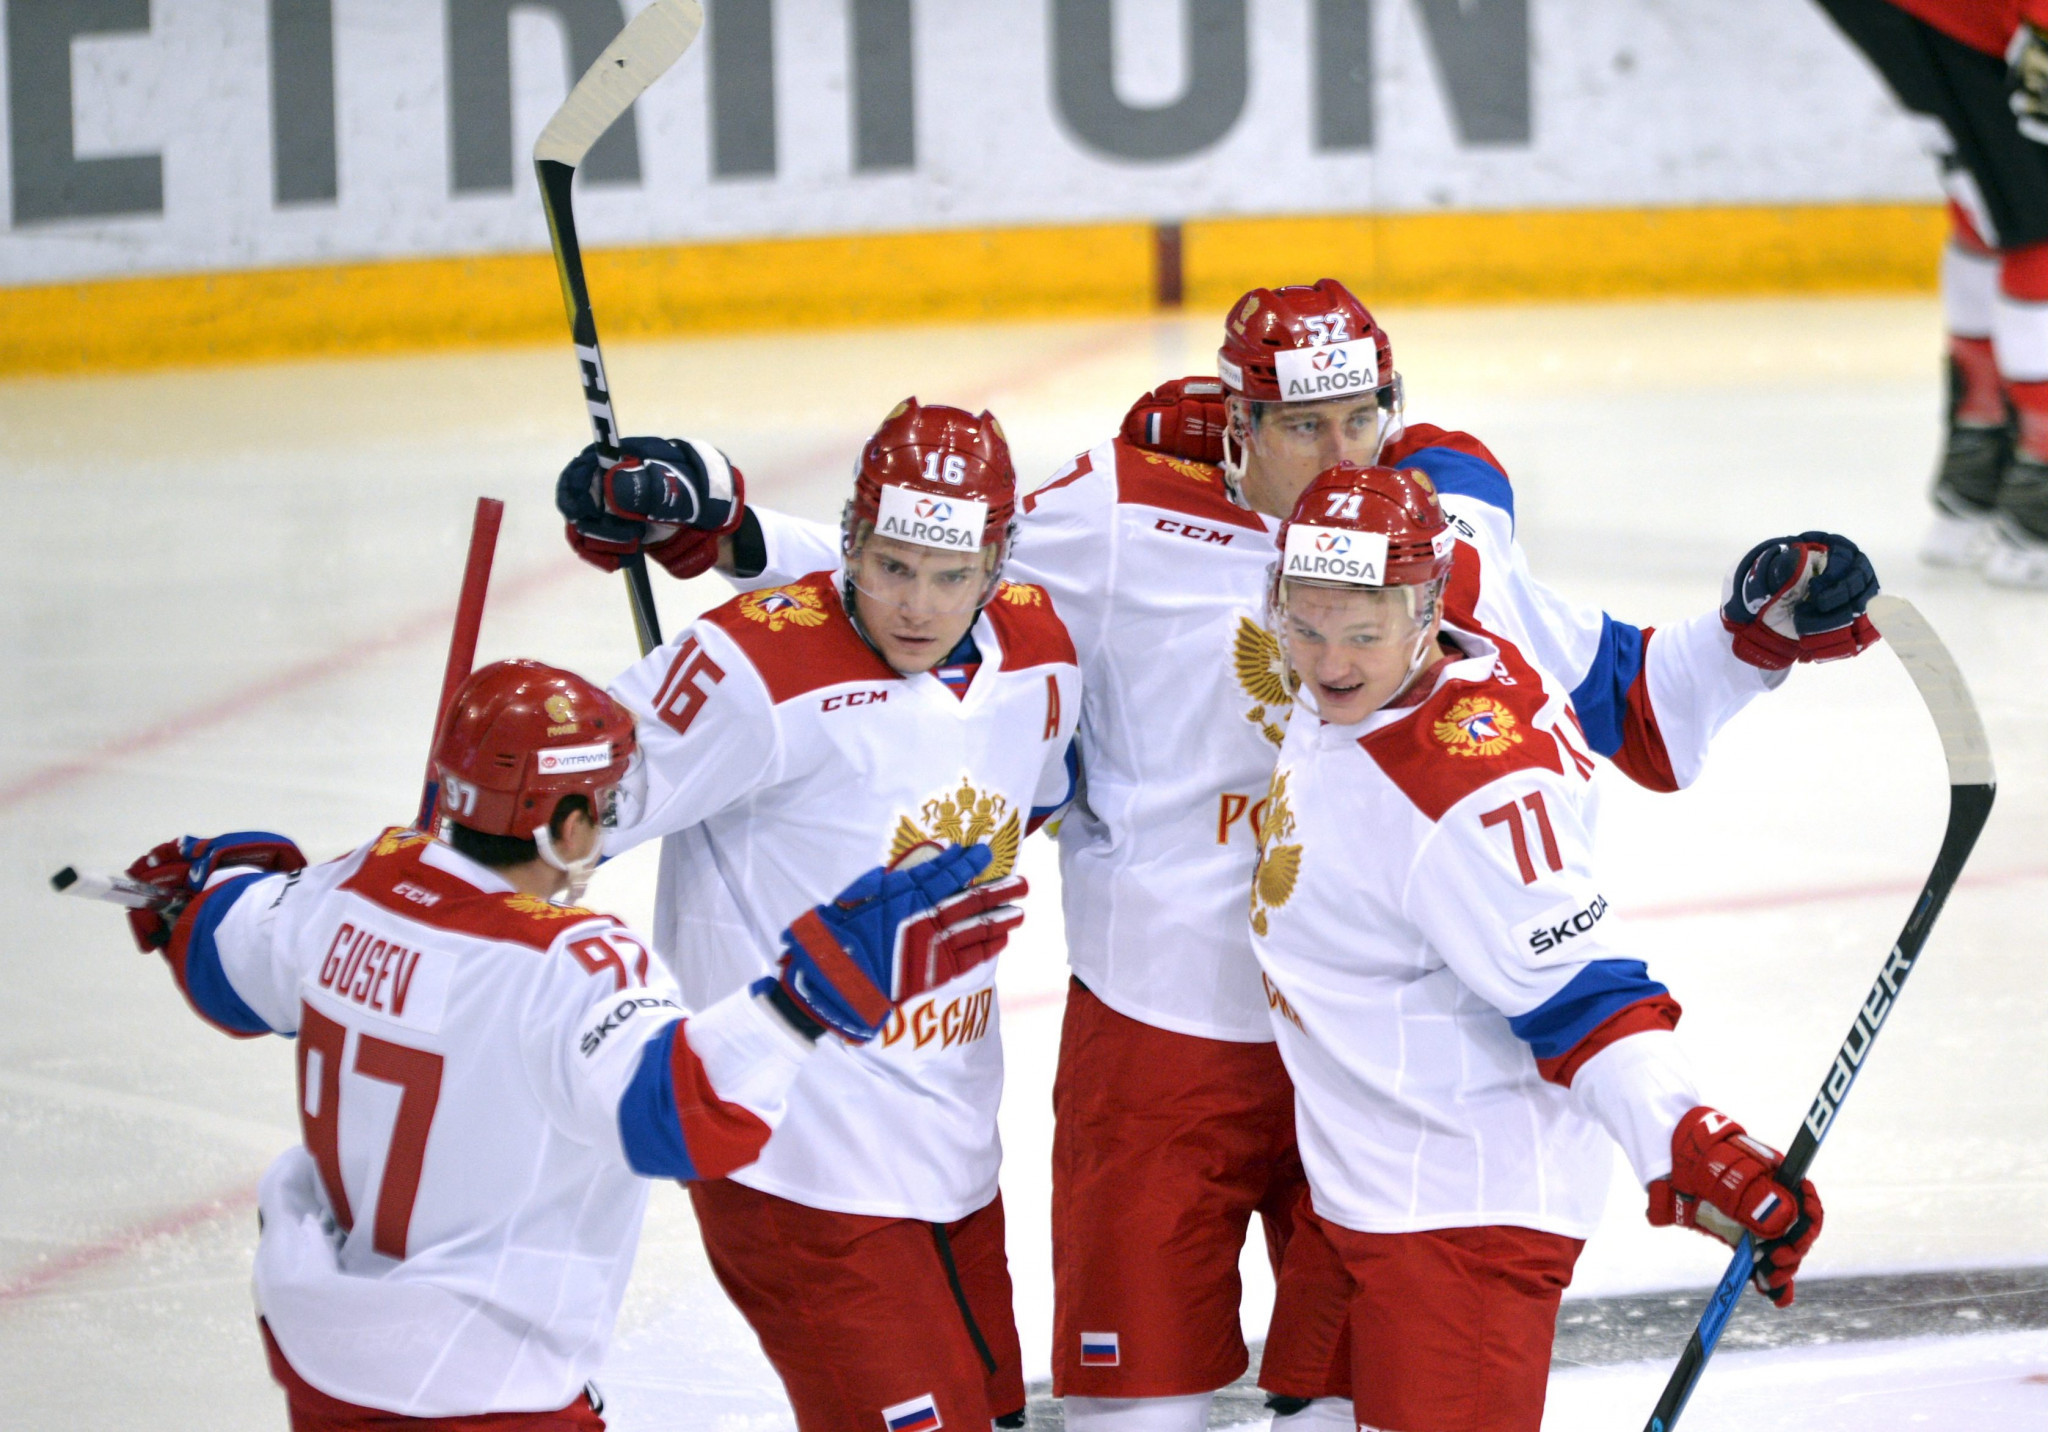 The IIHF has given its full support to Russia competing at Pyeongchang 2018 ©Getty Images